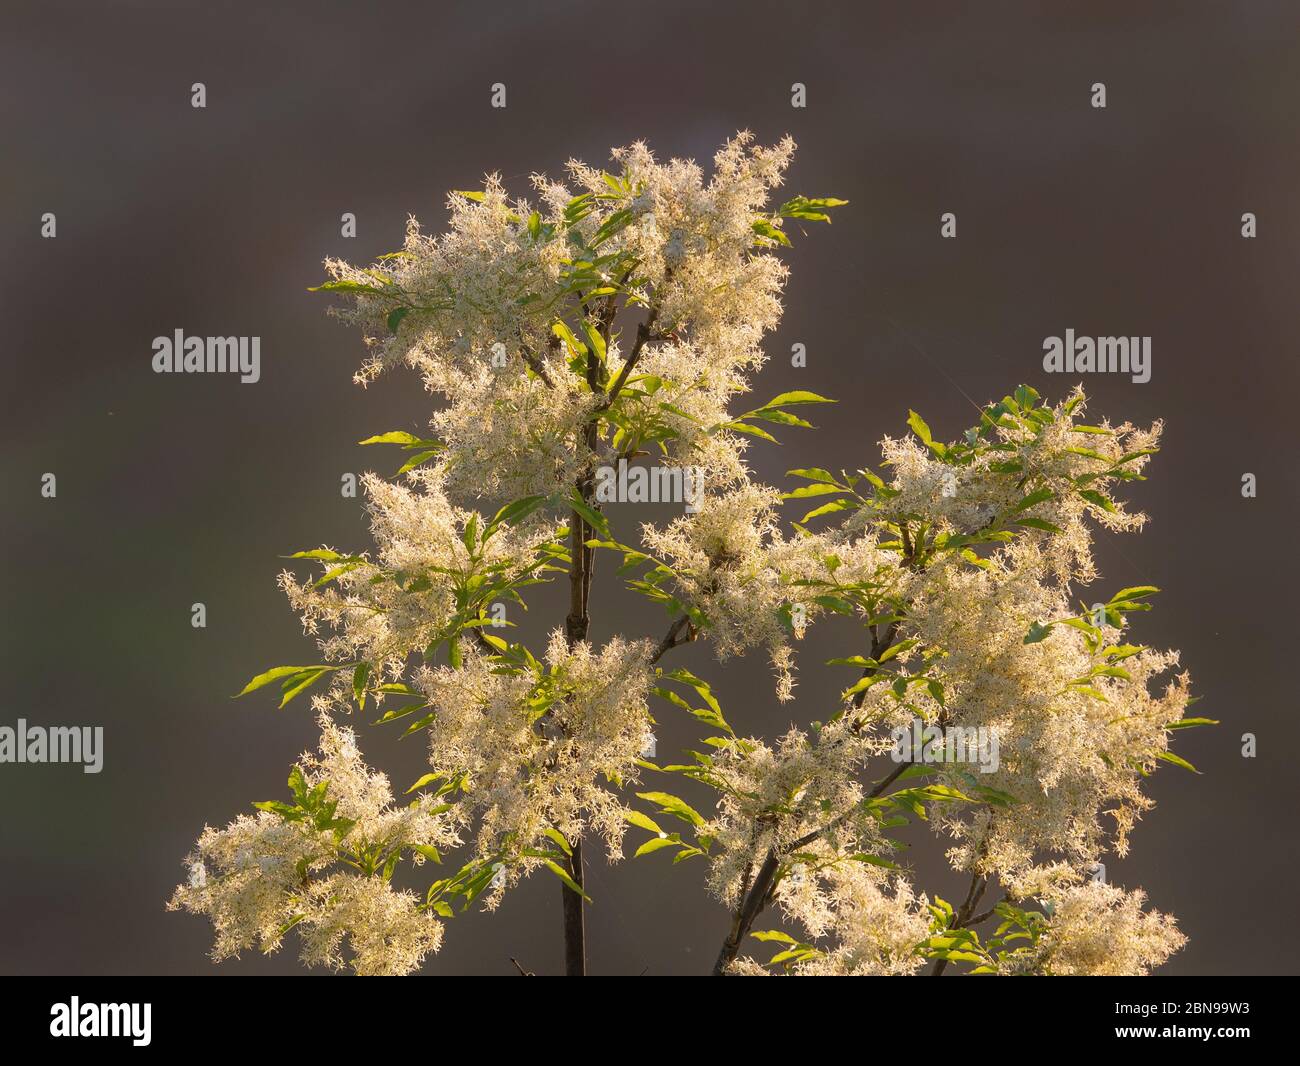 Ash branch full of clusters of little white flowers . Gray background Stock Photo